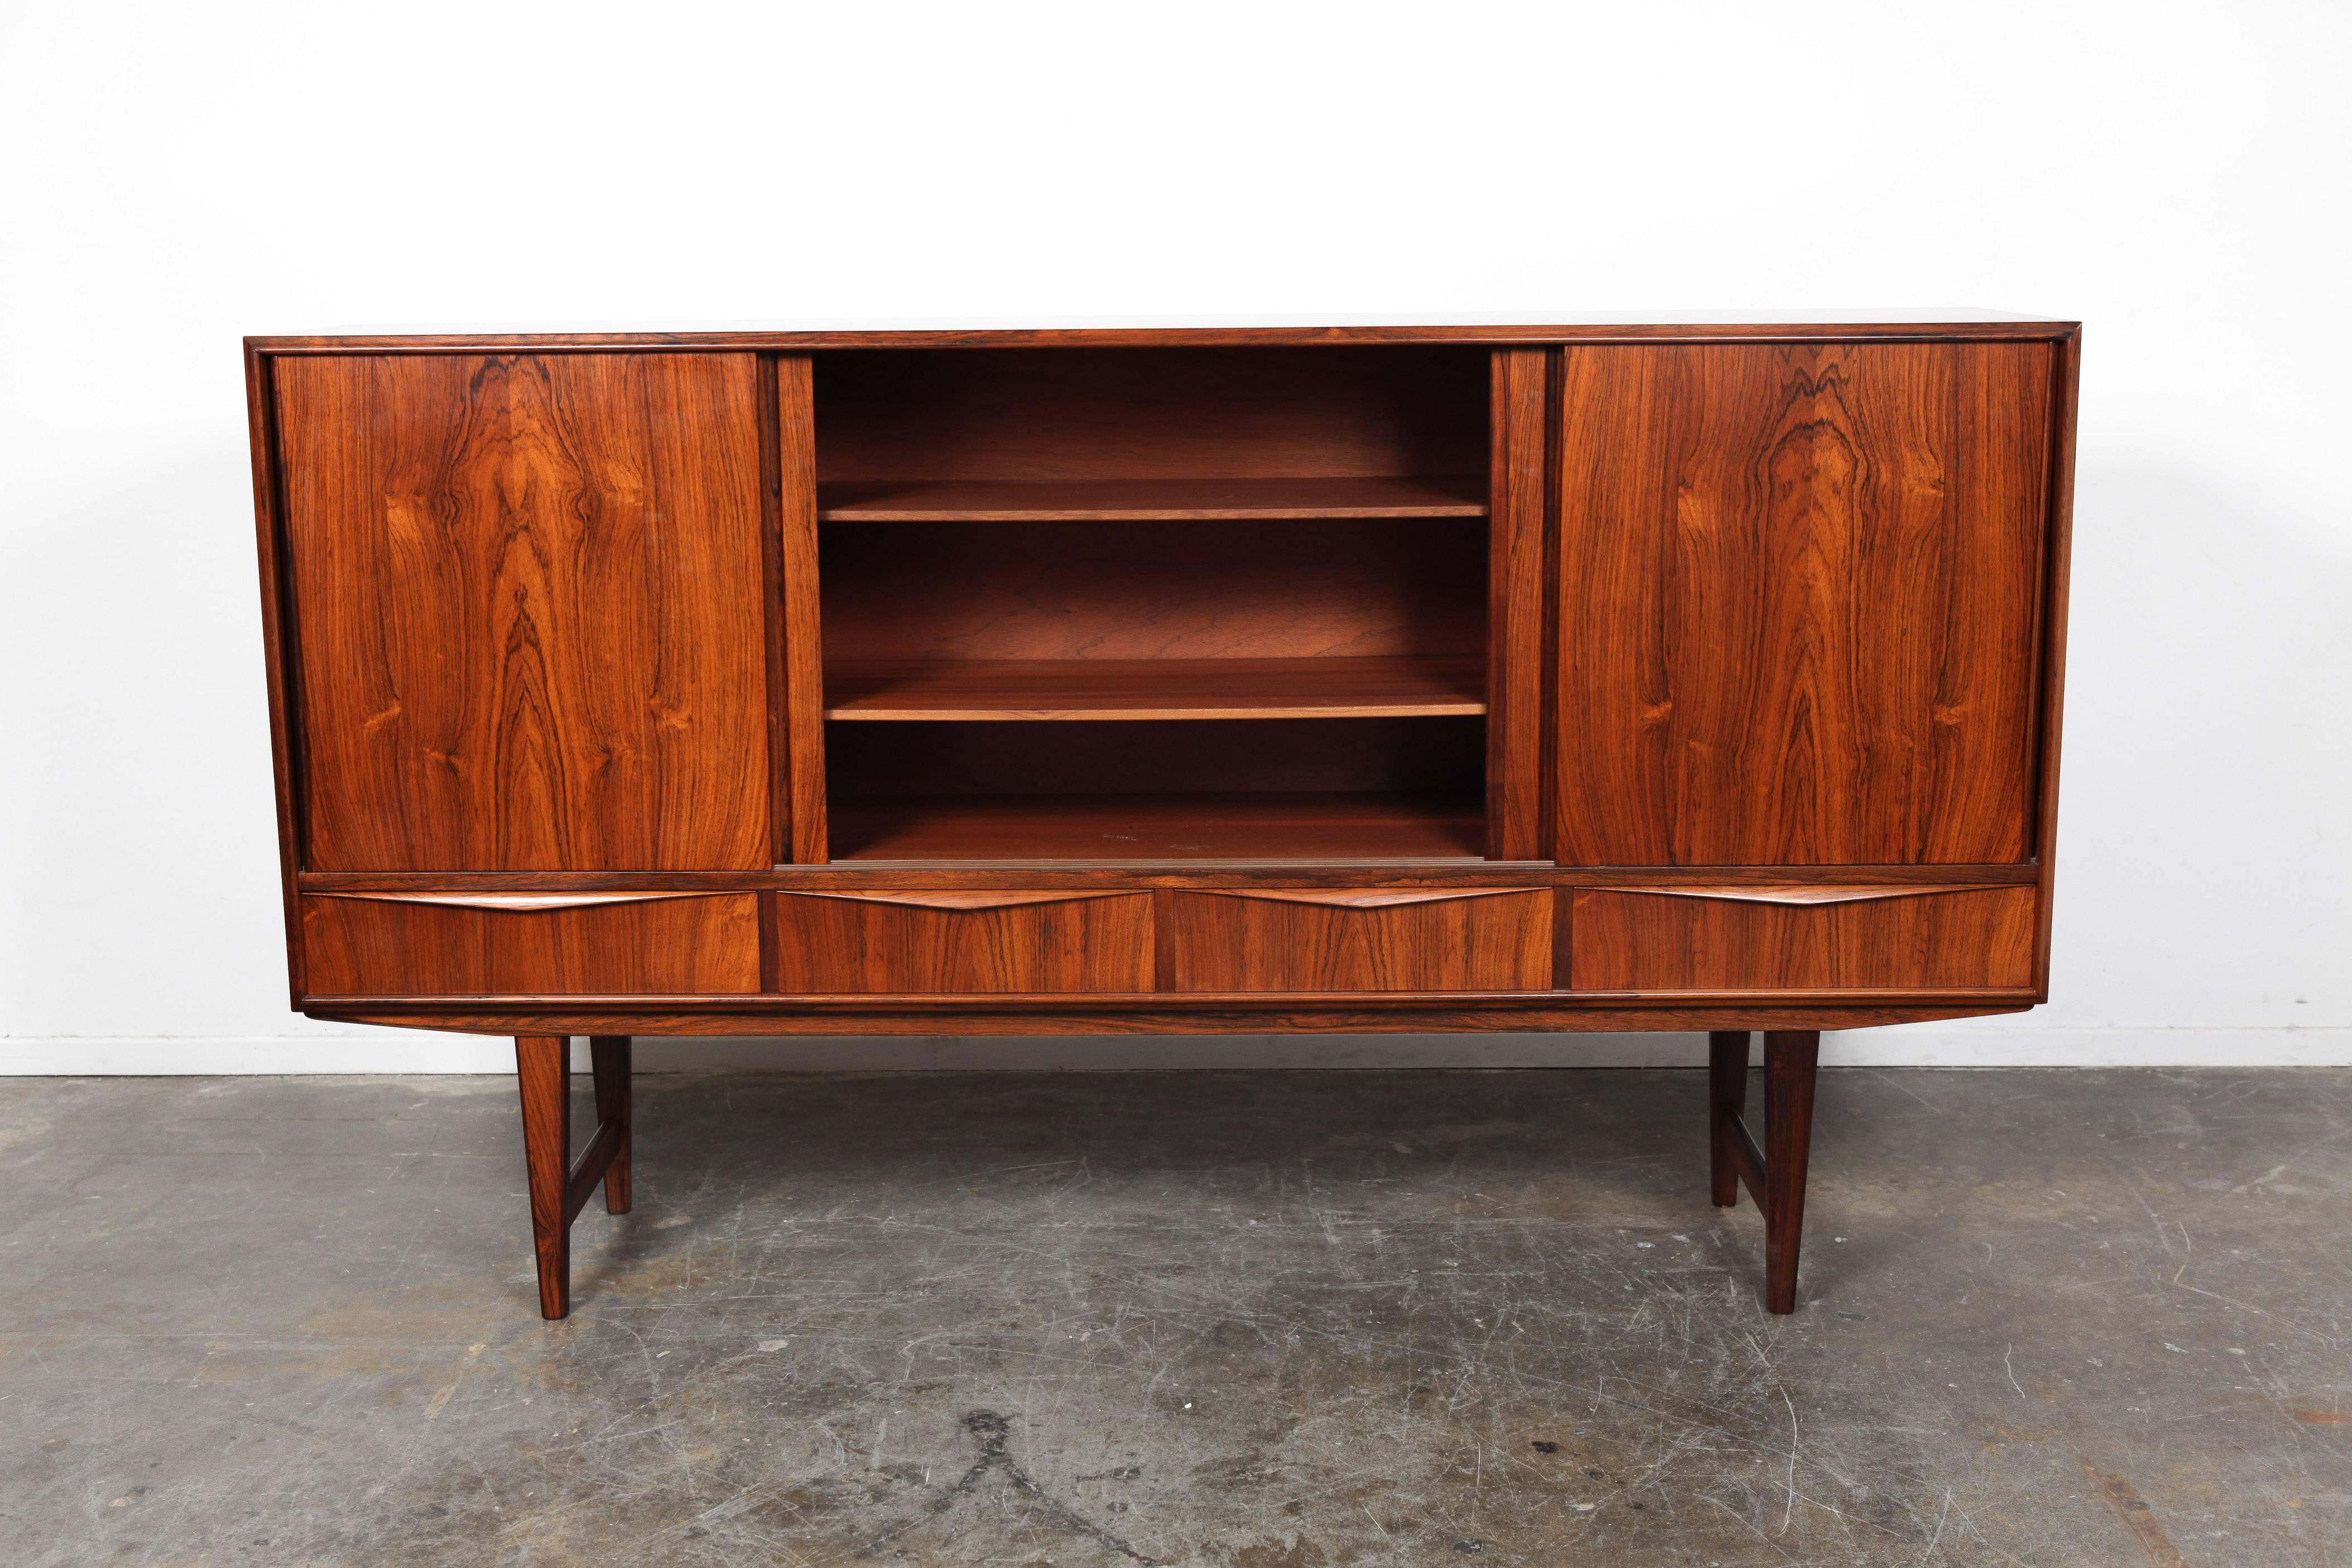 Danish Mid-Century Modern rosewood credenza designed by E.W. Bach. The right cabinet features a frosted patterned mirror with two drawers and detailed marquetry.